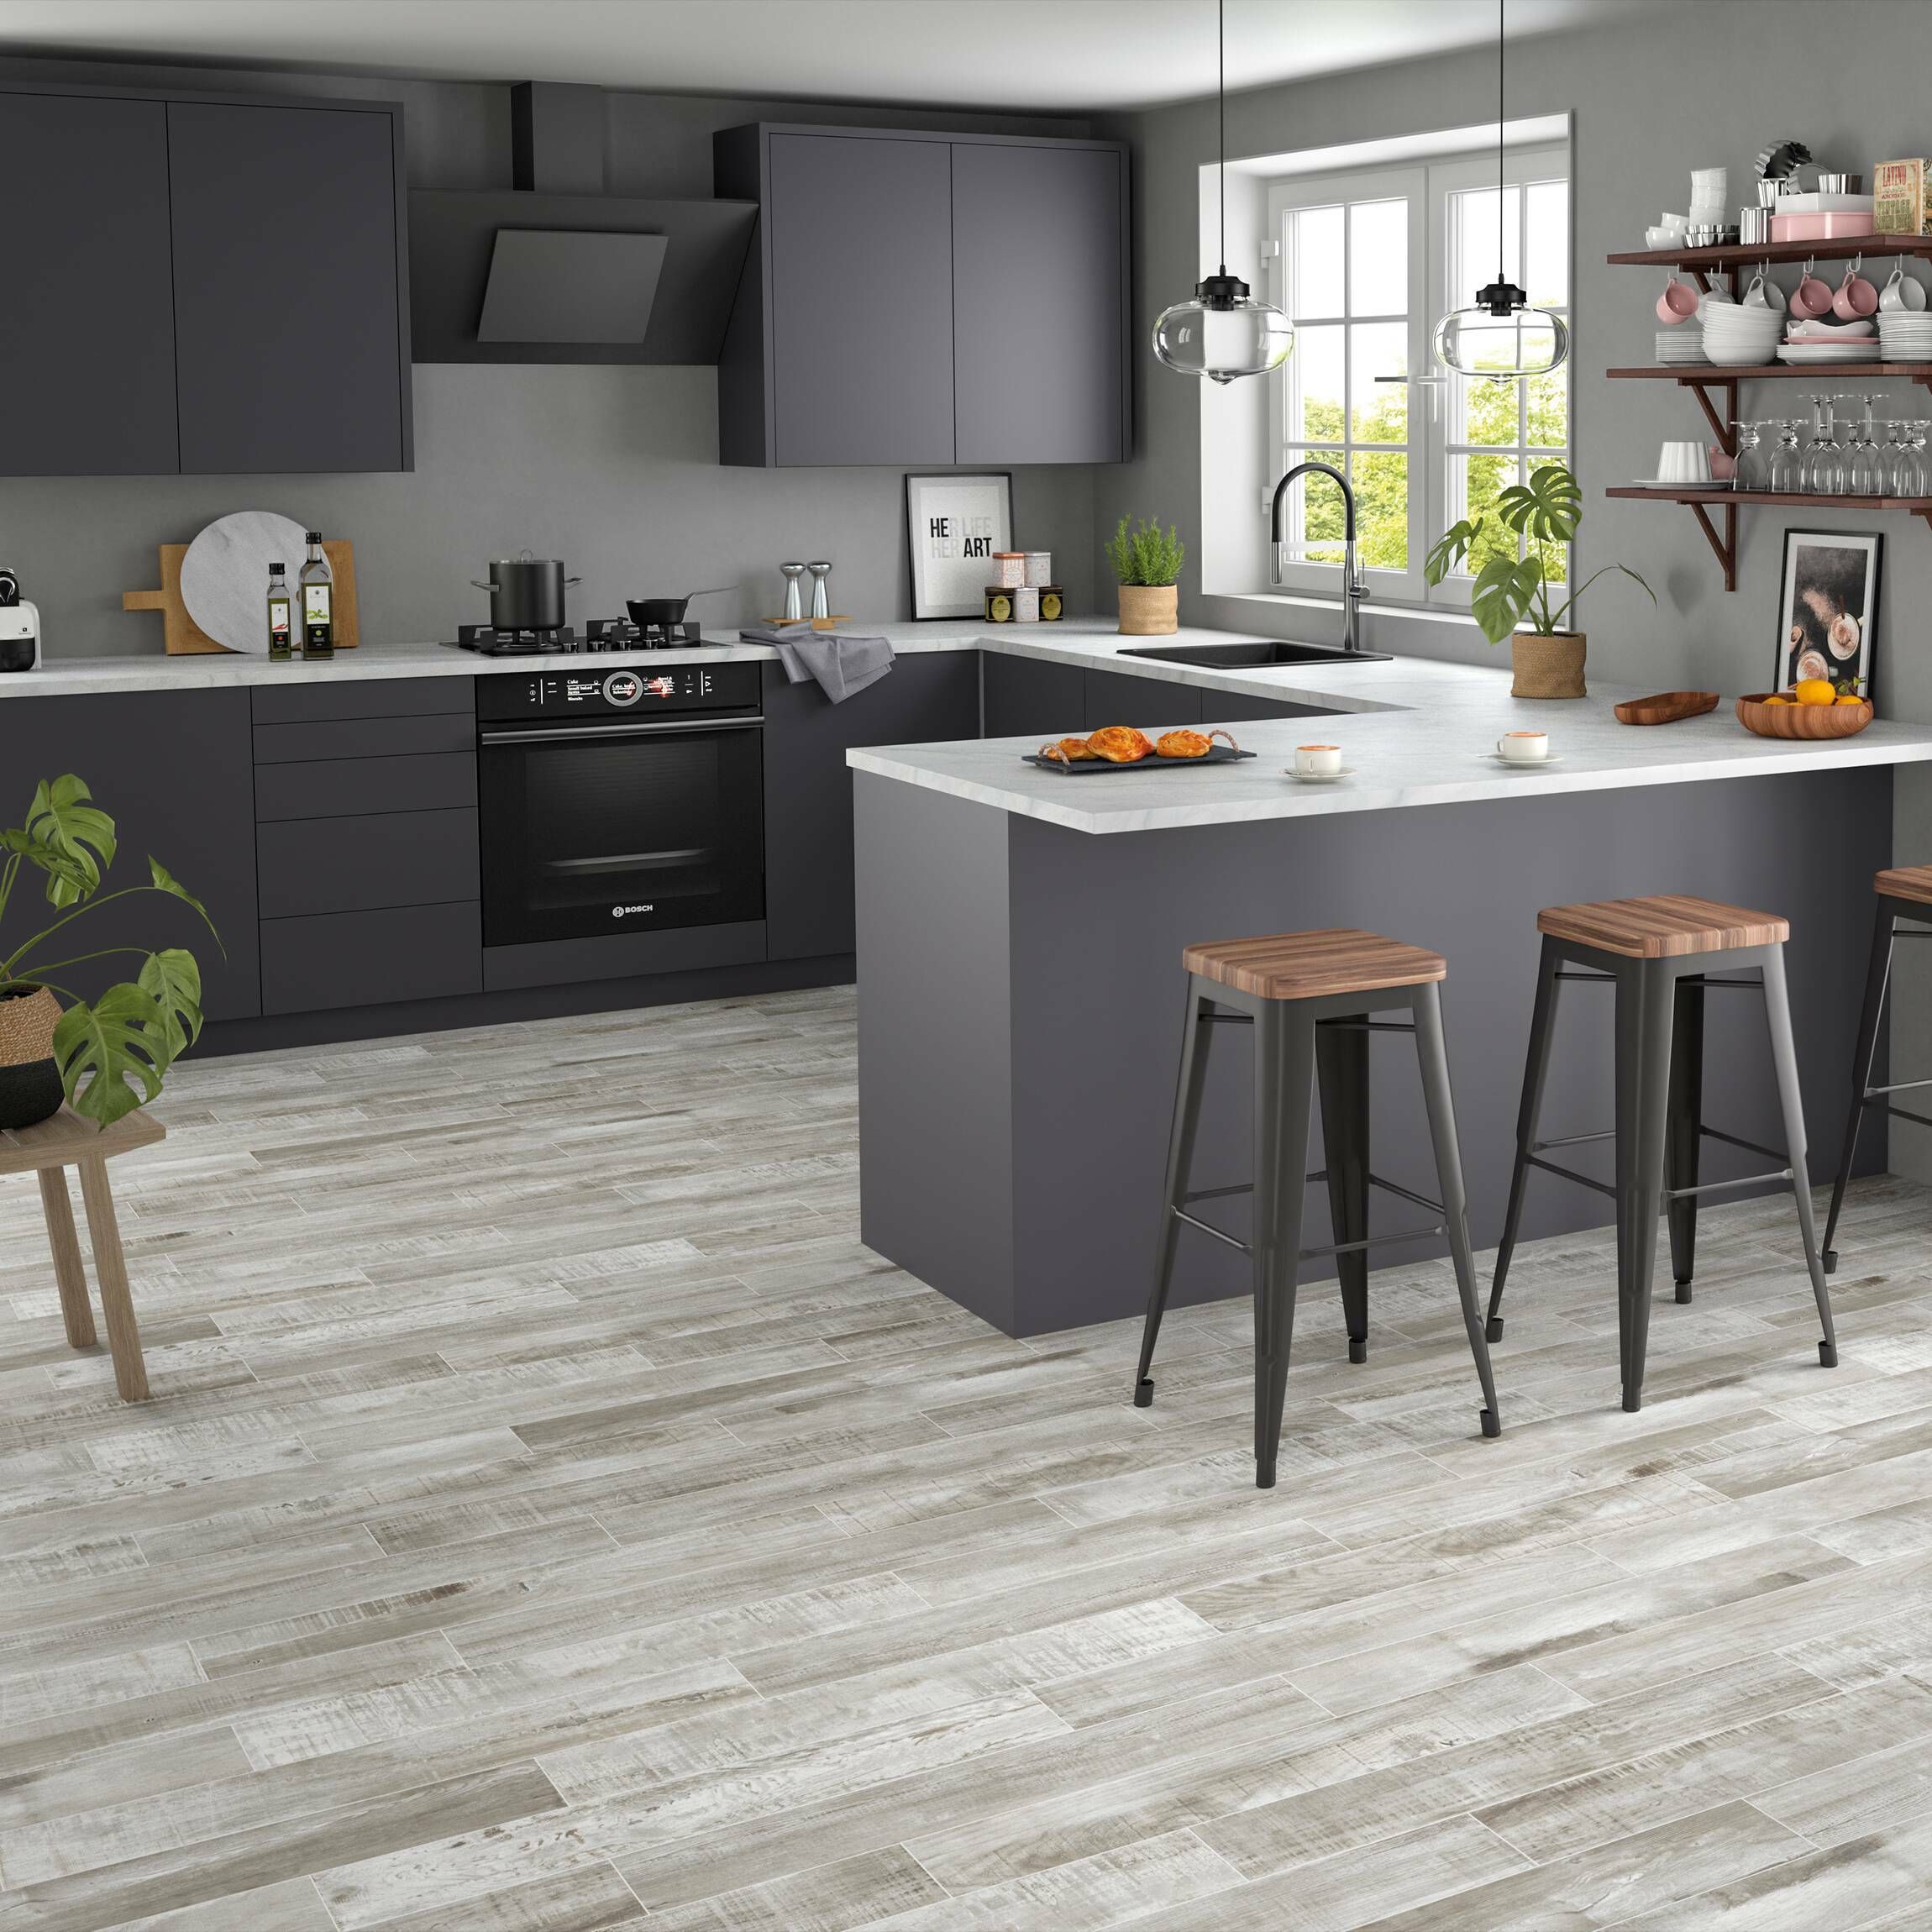 Mikeno Grey Wood Effect Wall And Floor, Gray Wood Tile Kitchen